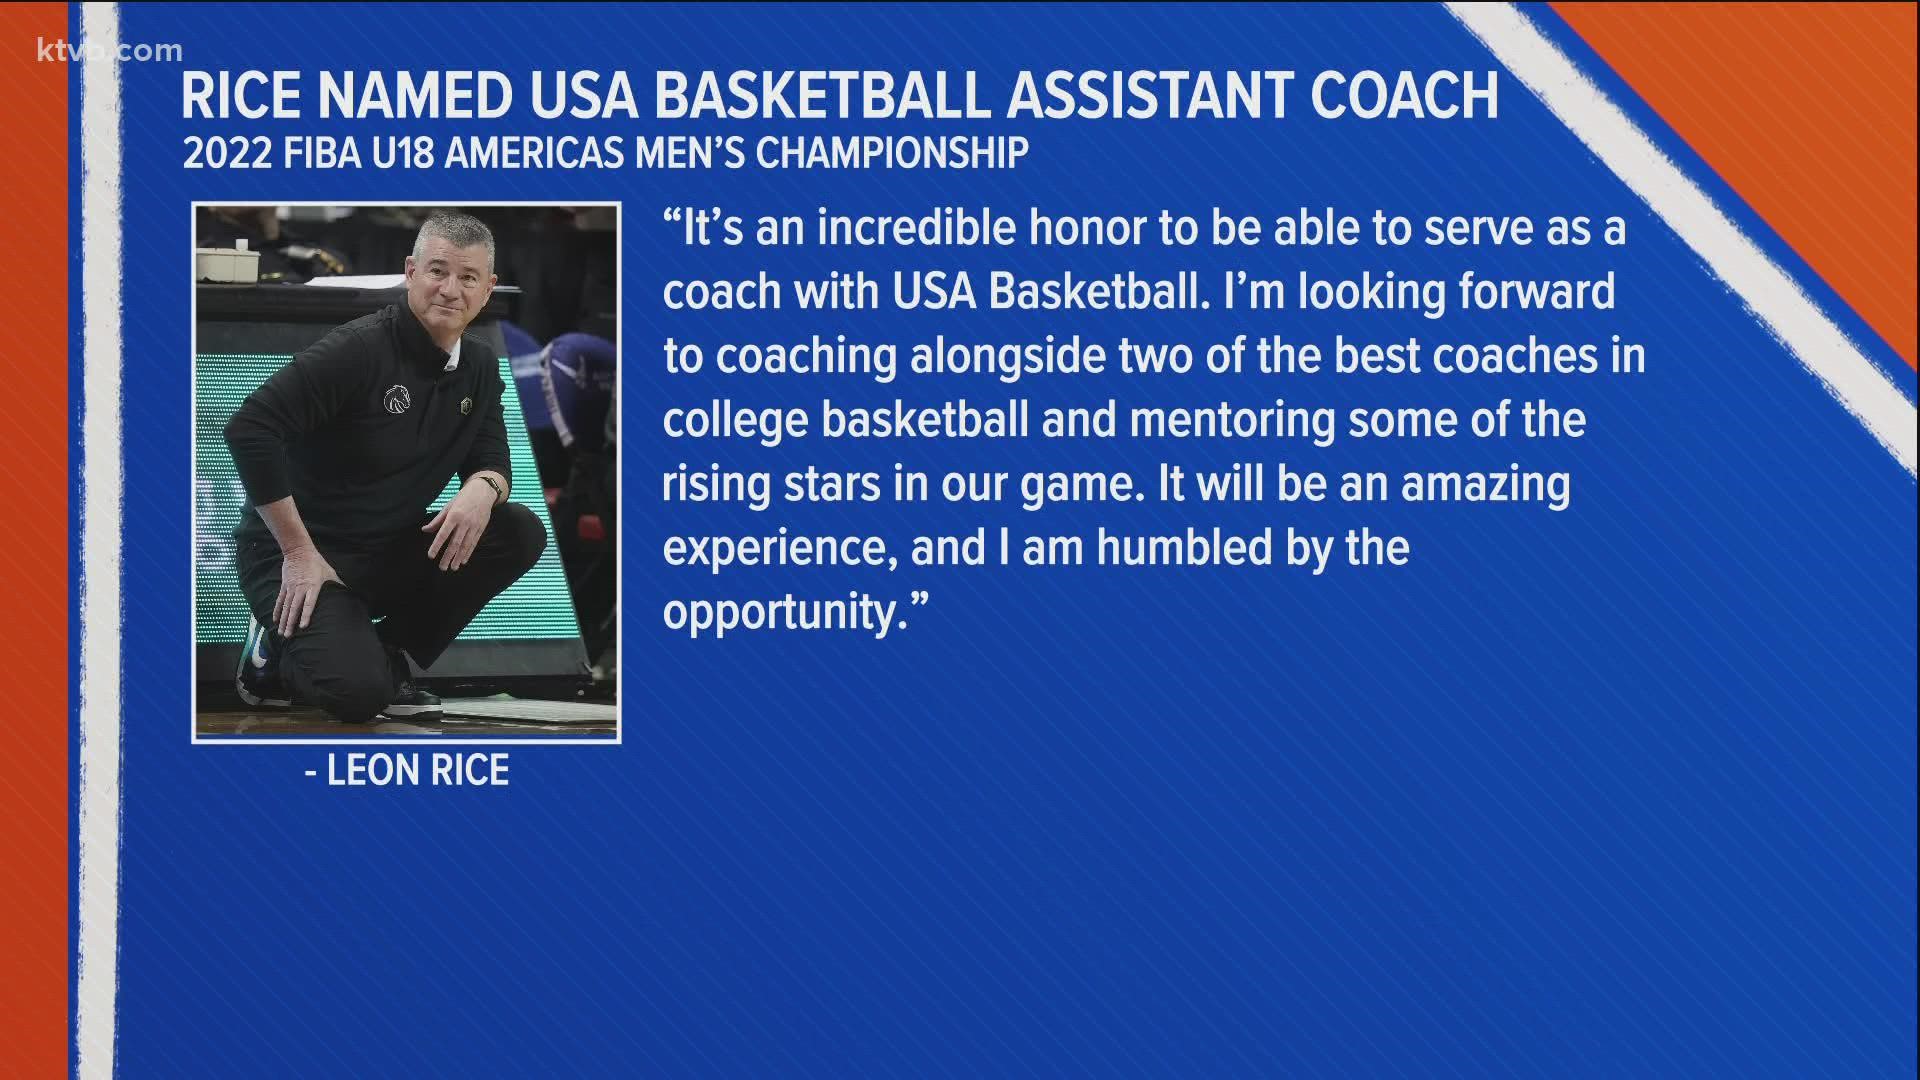 Rice was selected by the USA Basketball Men's Junior National Team Committee. The team will compete at the 2022 FIBA U18 Americas Men's Championship.